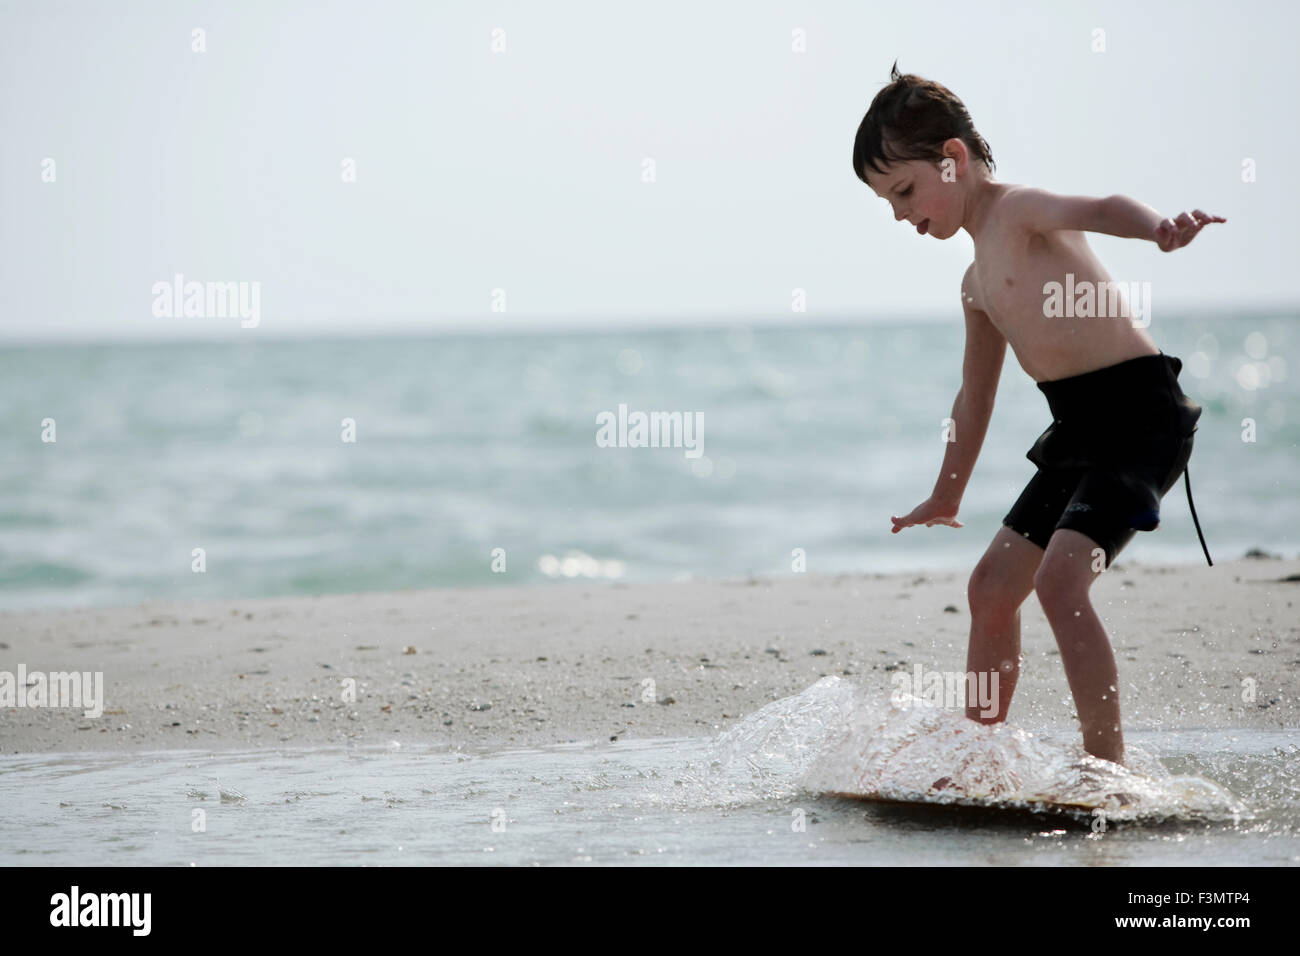 A young boy in a wetsuit surfs on his skim board at the shore. Stock Photo